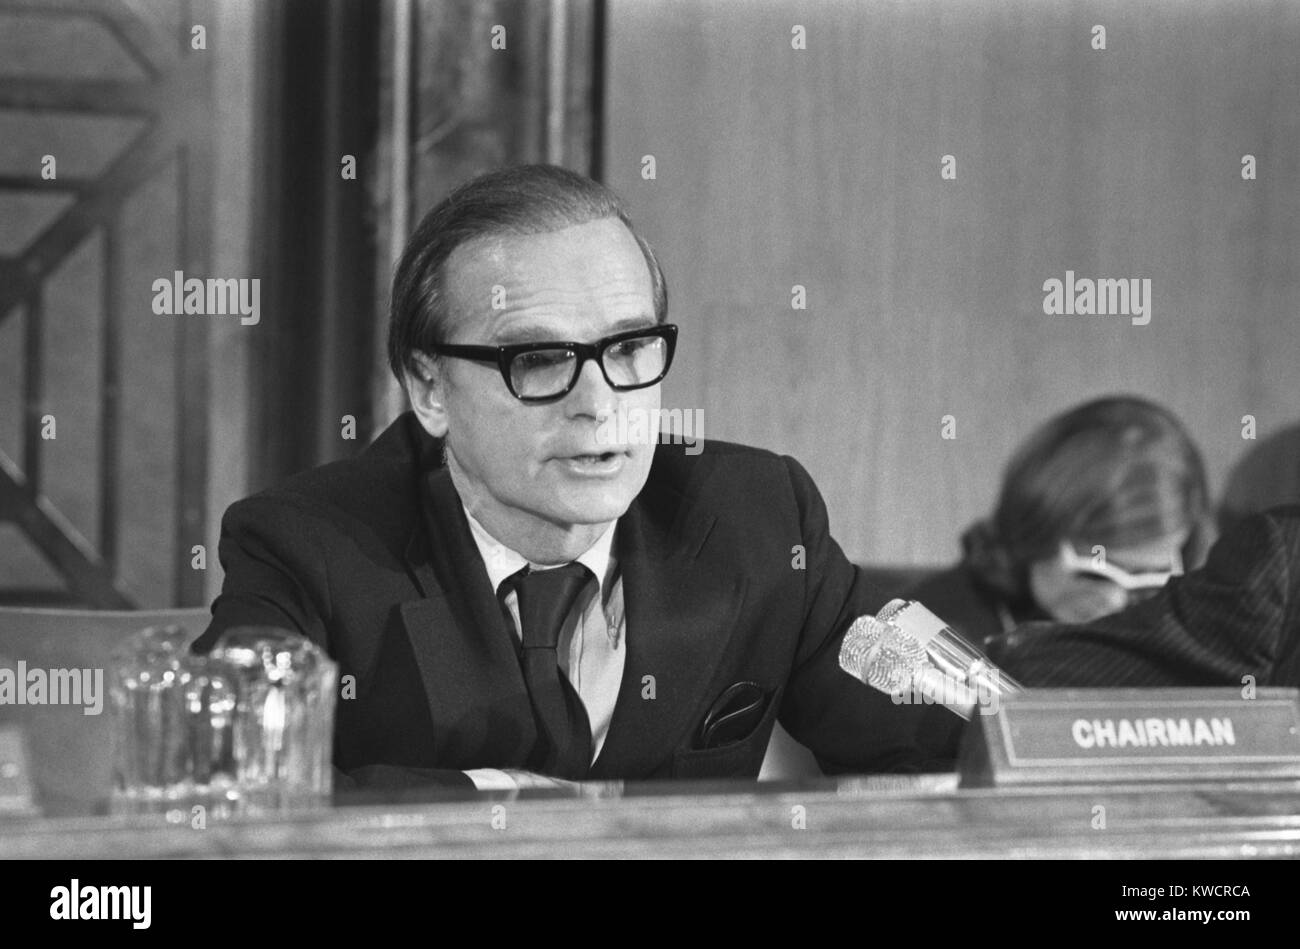 Alan Greenspan testifying before a joint House-Senate Economic Committee, Jan. 6, 1975. Greenspan was then Chairman of the Council of Economic Advisers. - (BSLOC_2015_1_105) Stock Photo